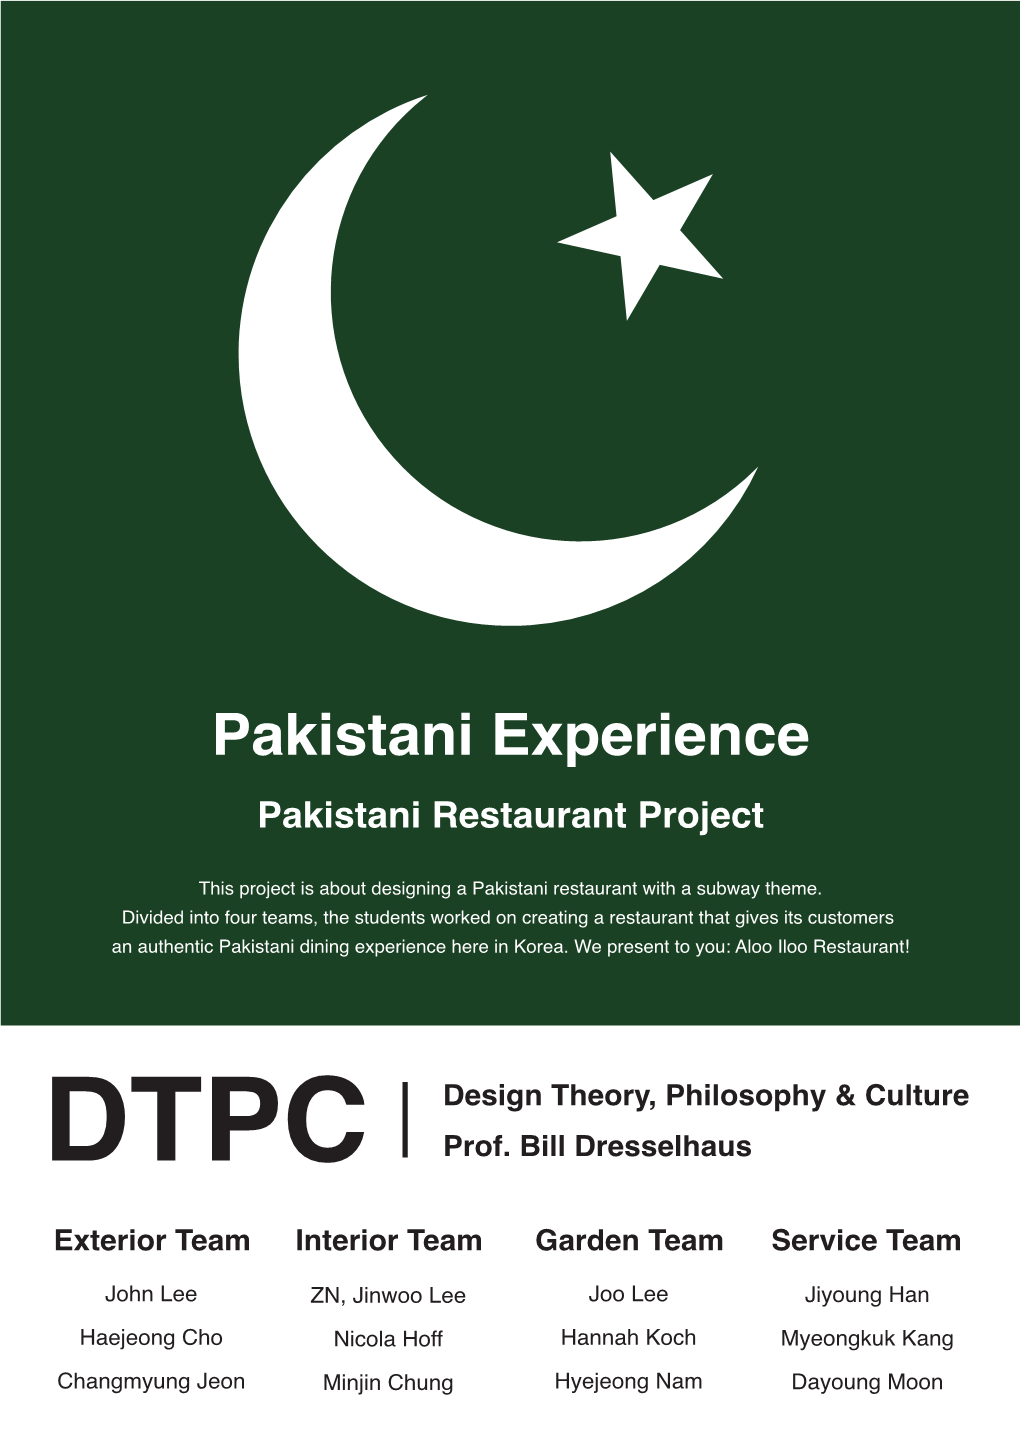 This Project Is About Designing a Pakistani Restaurant with a Subway Theme